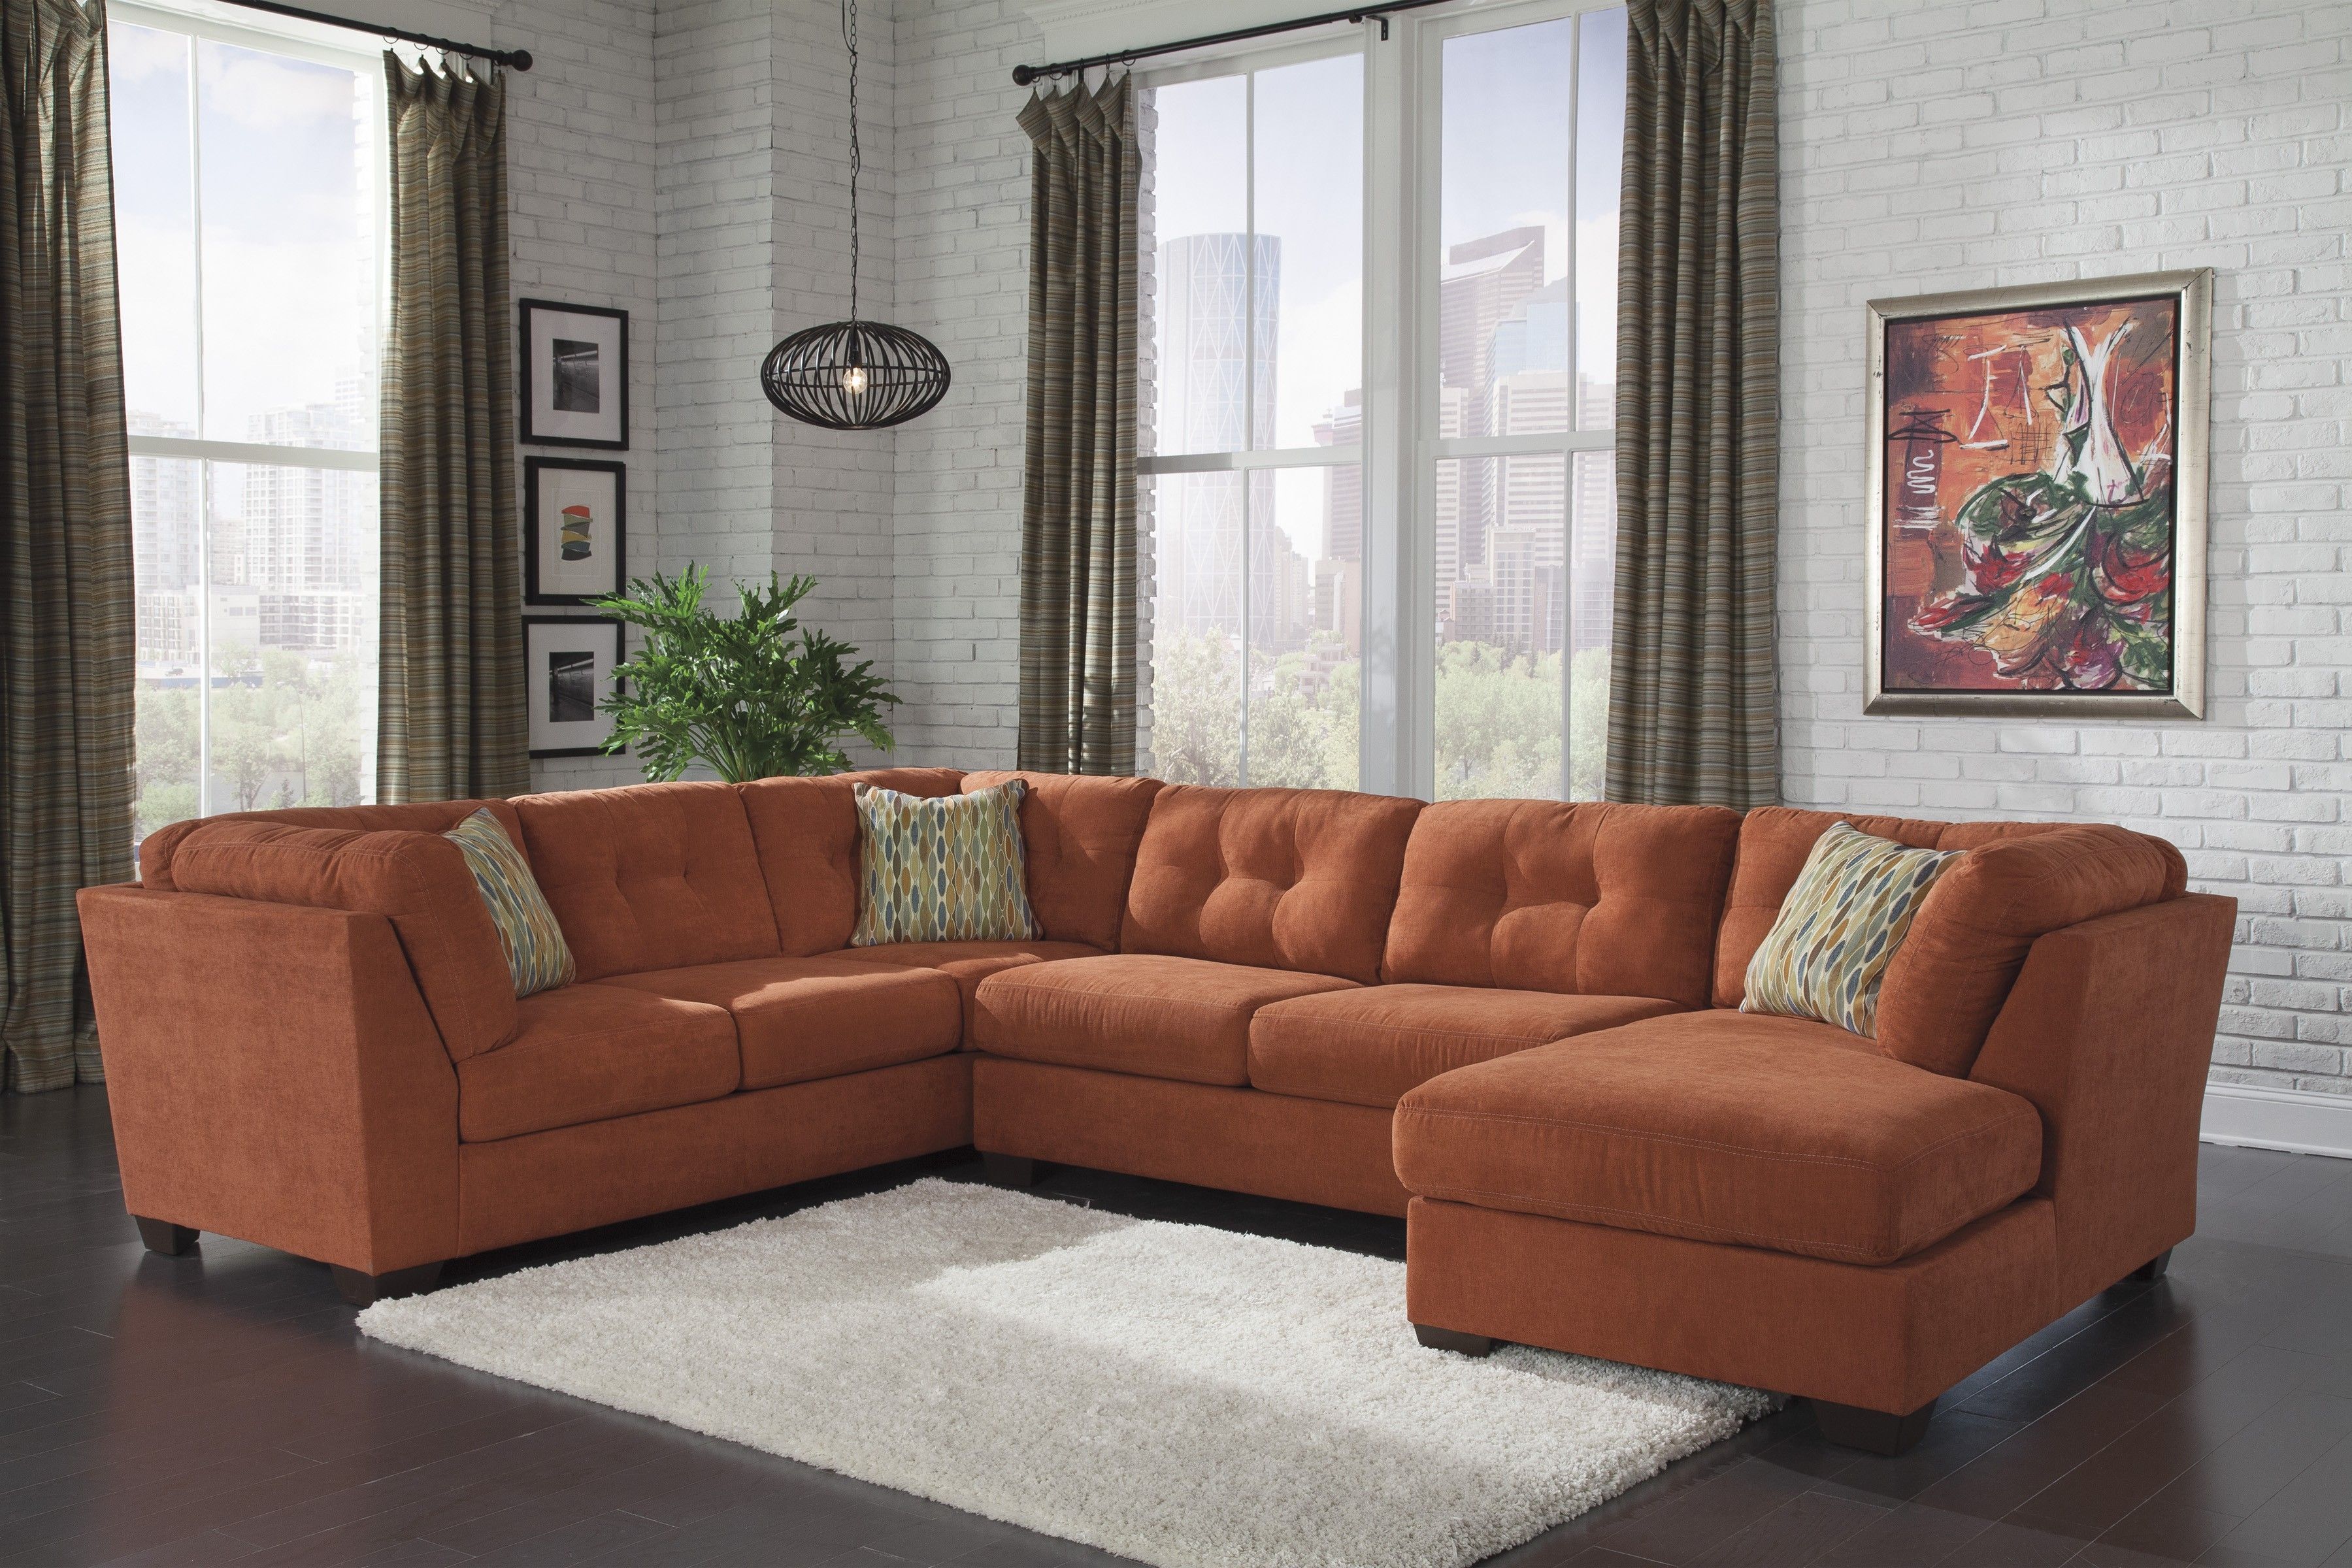 Appealing Armless Sectional Sofas 96 For Your 5 Piece Sectional With Regard To Armless Sectional Sofas (View 3 of 12)